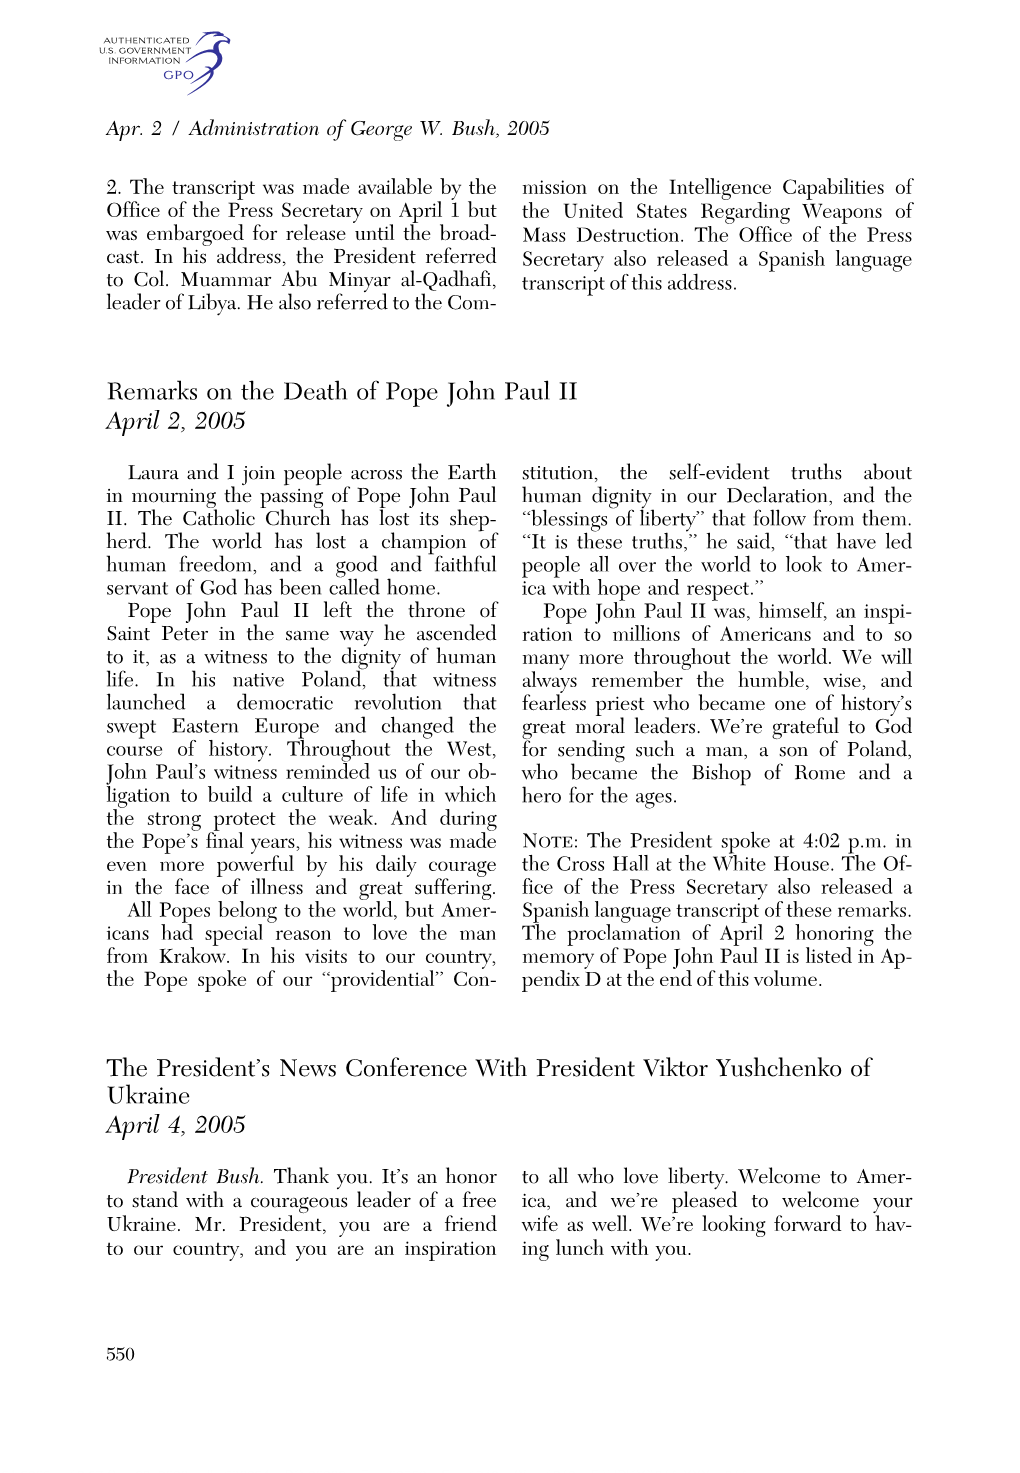 Remarks on the Death of Pope John Paul II April 2, 2005 the President's